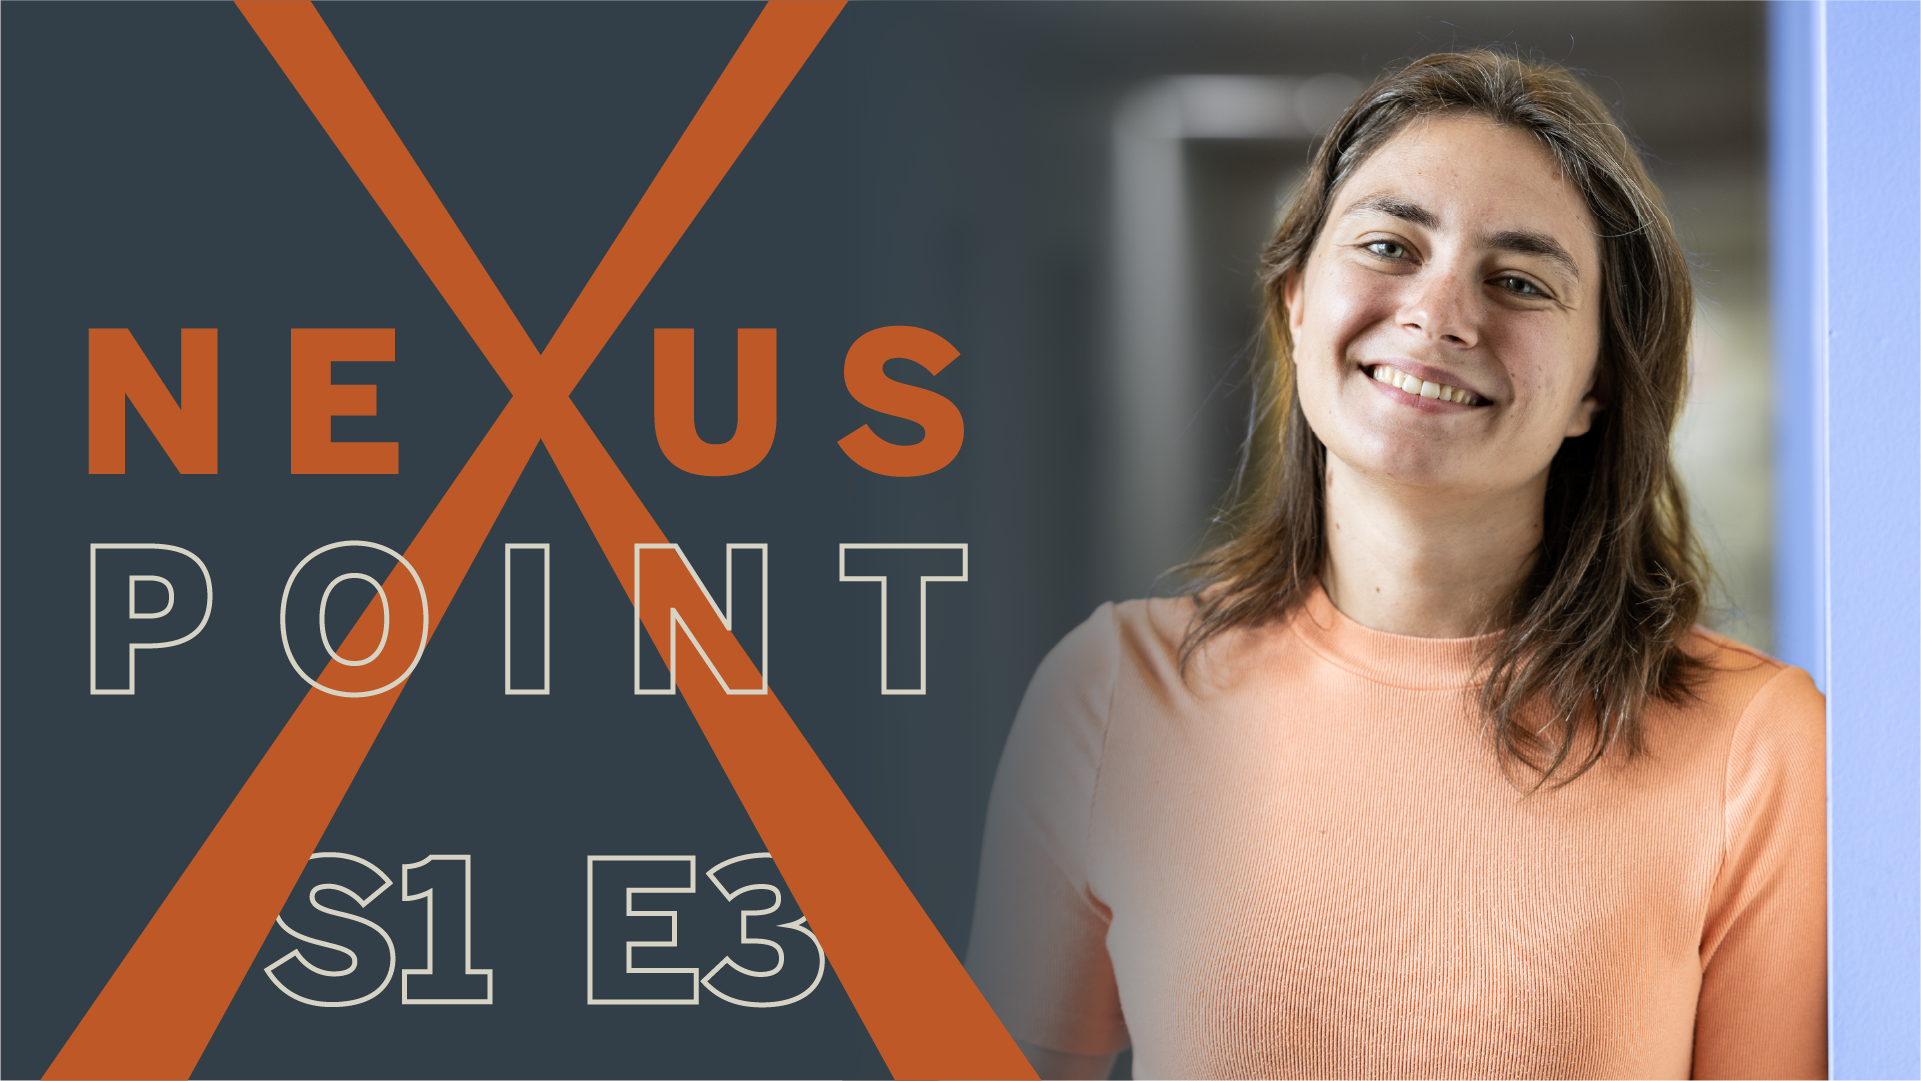 A woman with brown hair smiles next to an infographic that says "Nexus Point S1 E3"